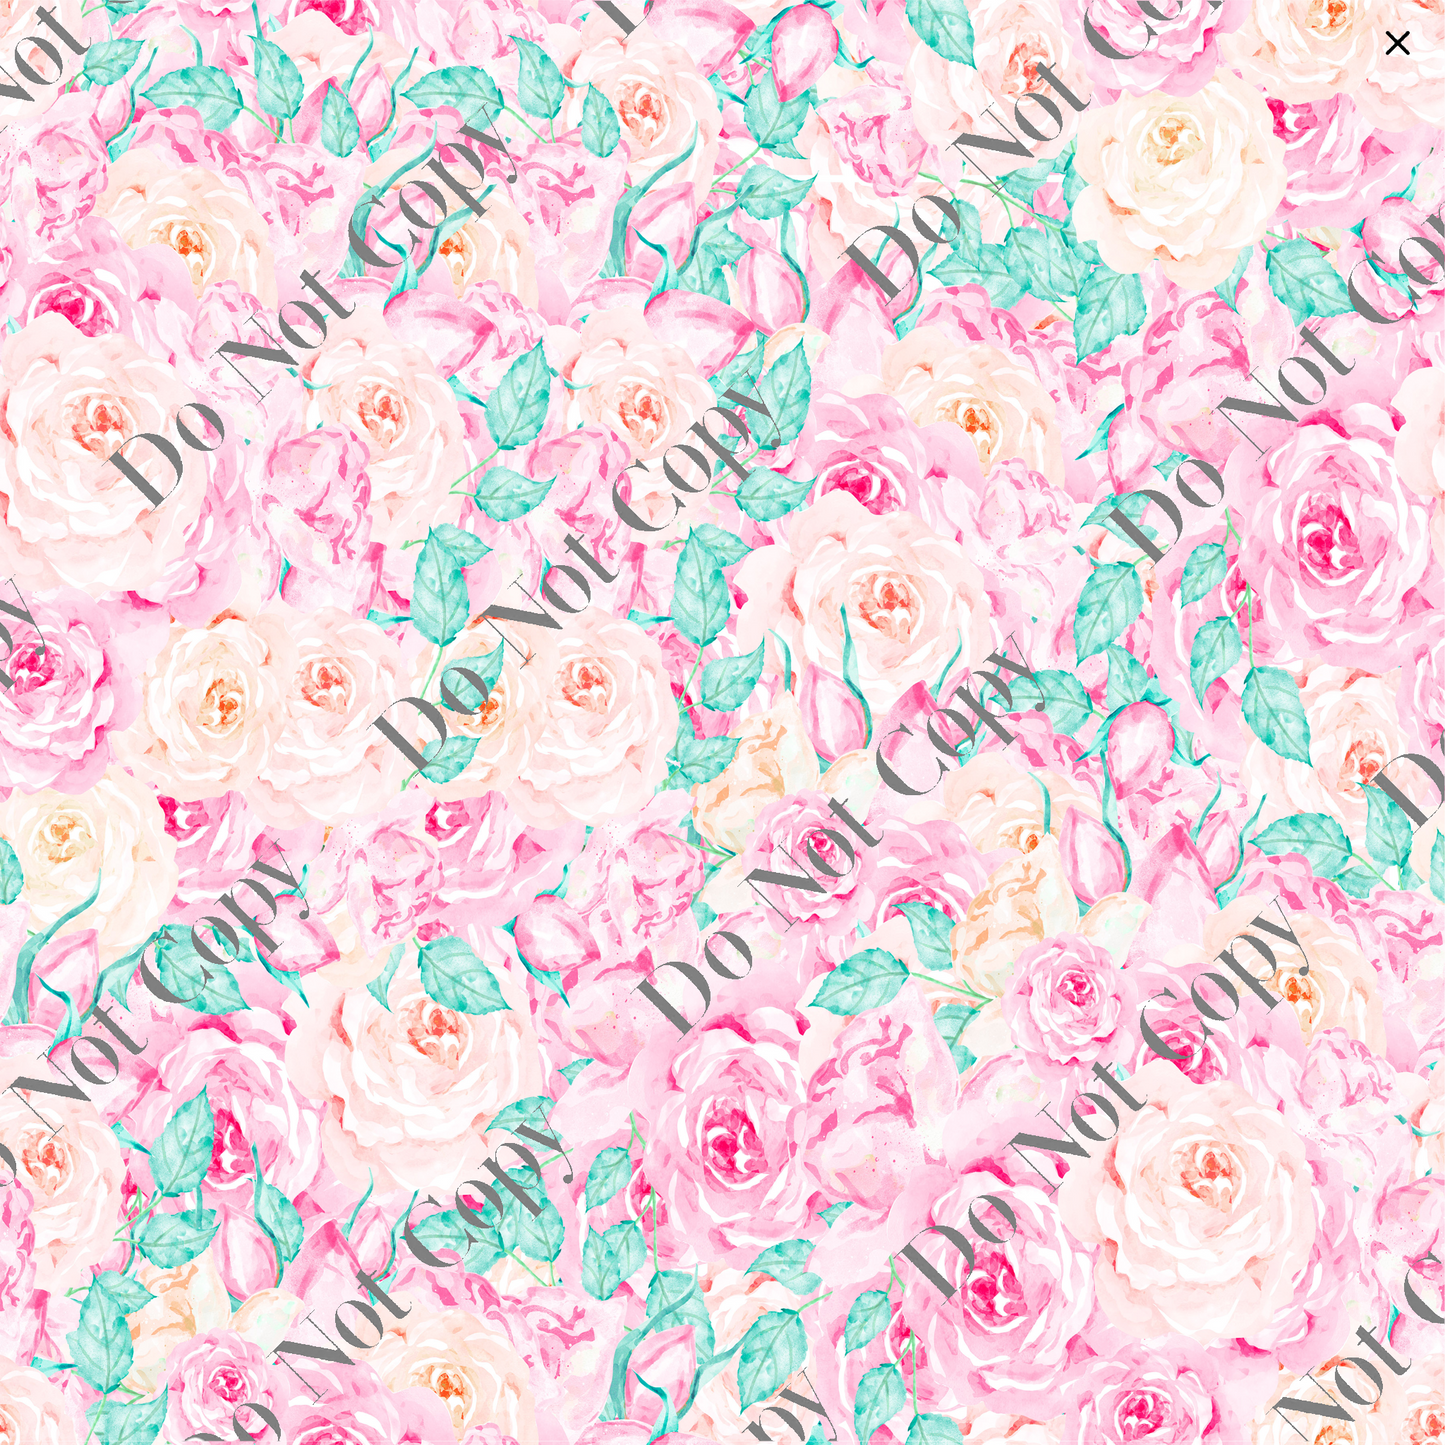 Patterned Vinyl - Pink and Peach Floral